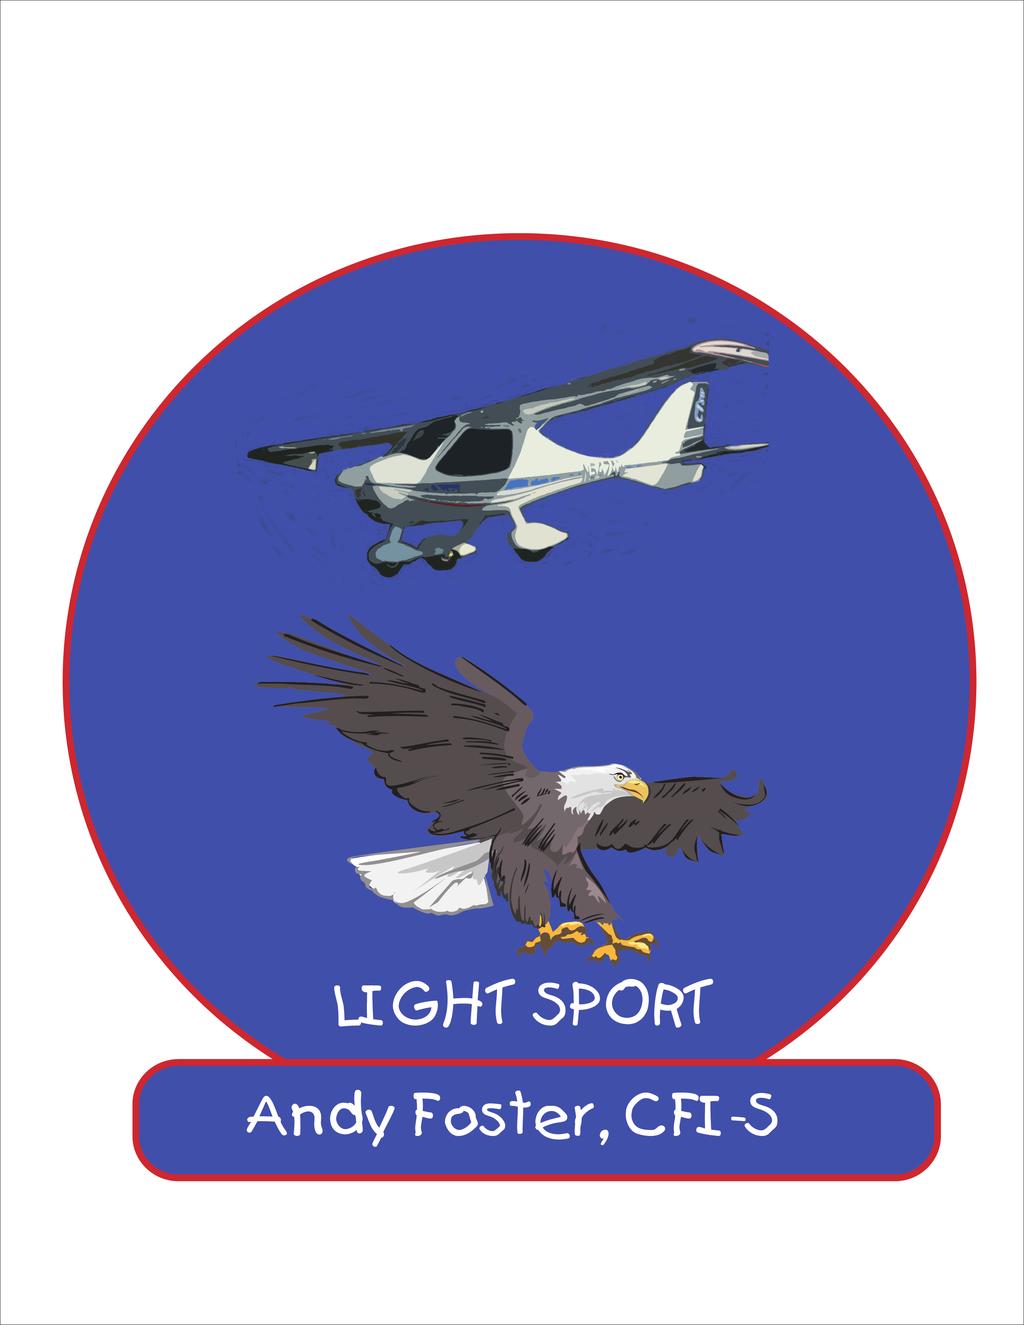 Andy Foster s CFI-S